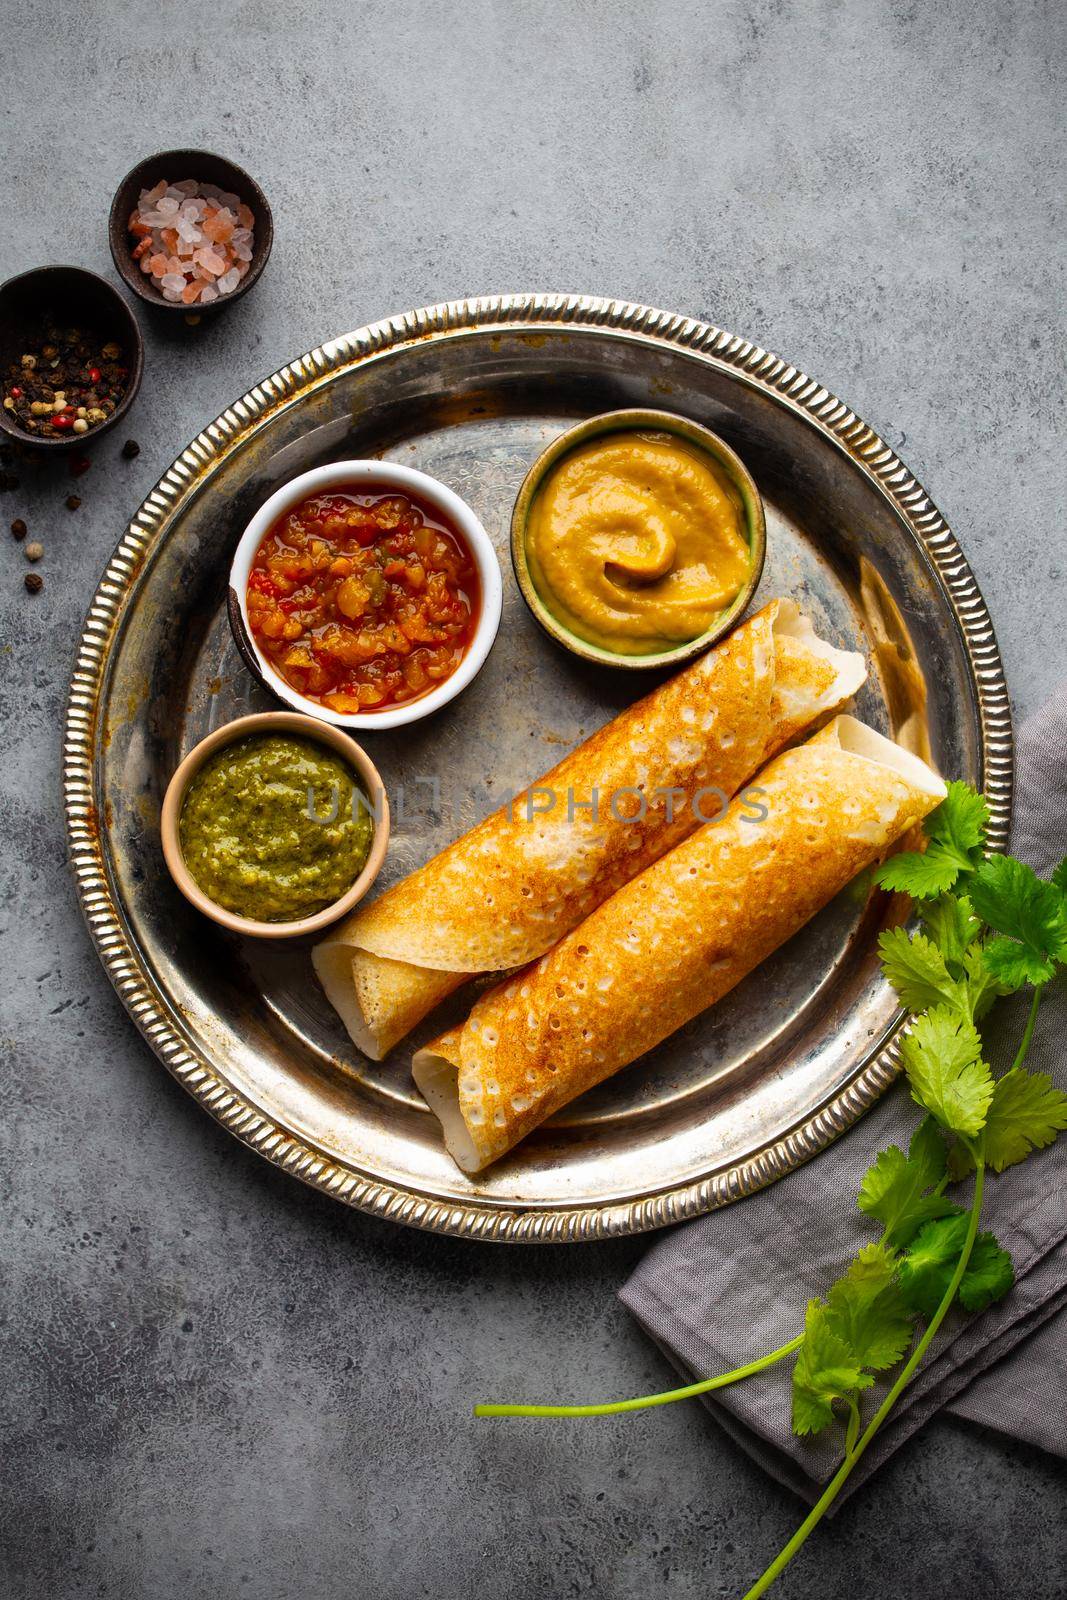 Traditional Indian rice pancakes Dosa with different dips chutney and seasonings on rustic metal plate on stone background table. Quick meal or vegetarian snack of South India, top view